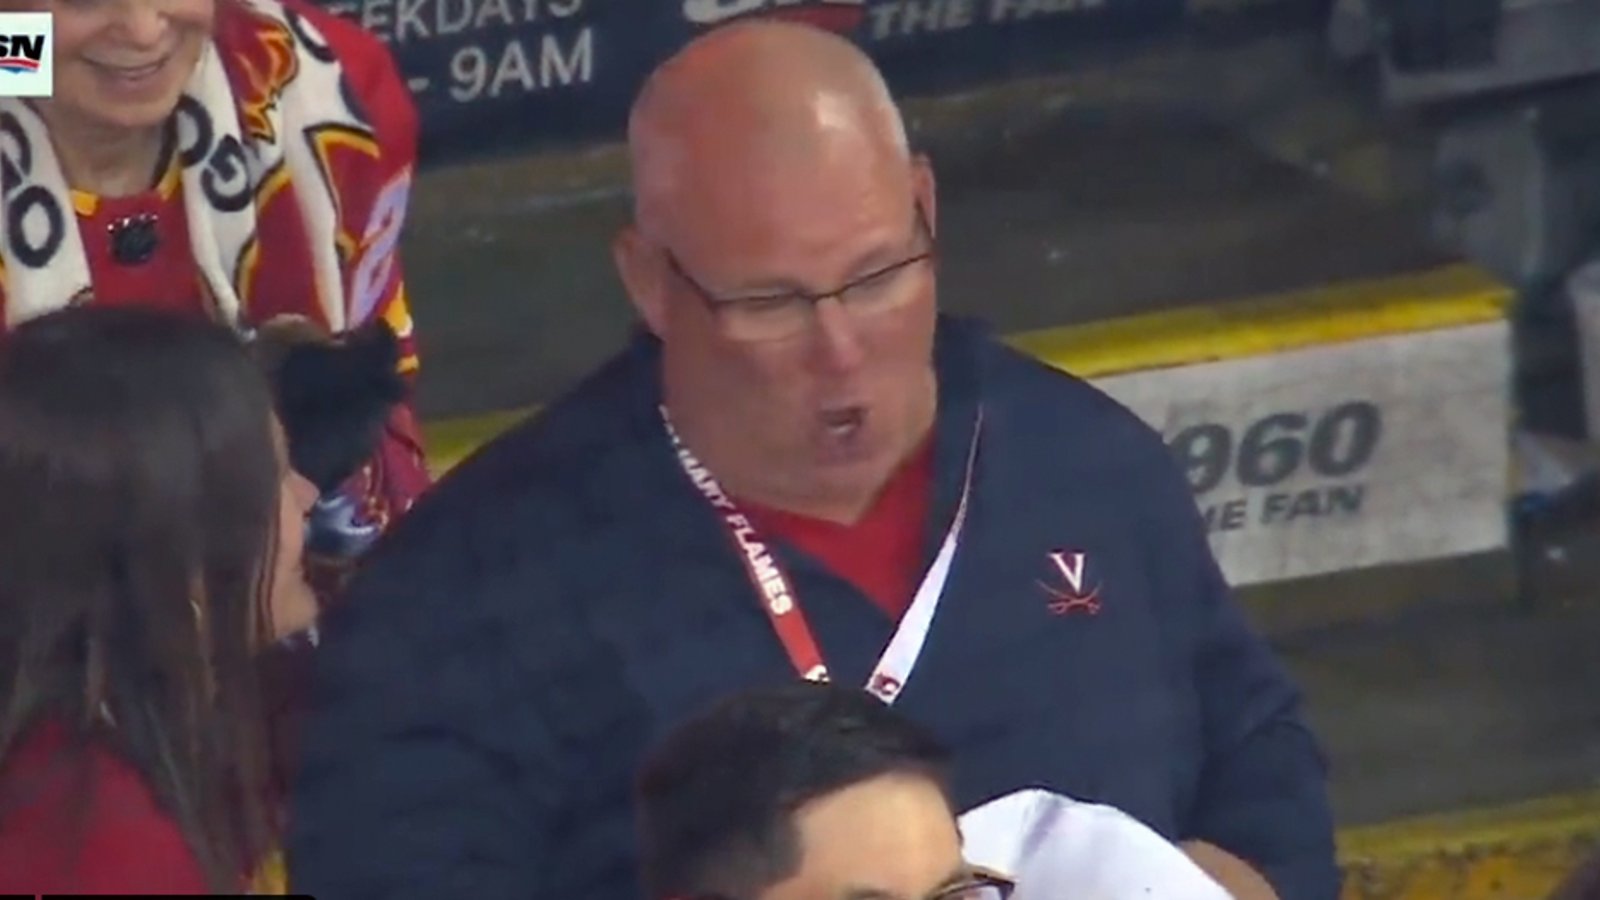 Keith Tkachuk refuses to throw his hat on the ice after Matthew Tkachuk's hat trick goal